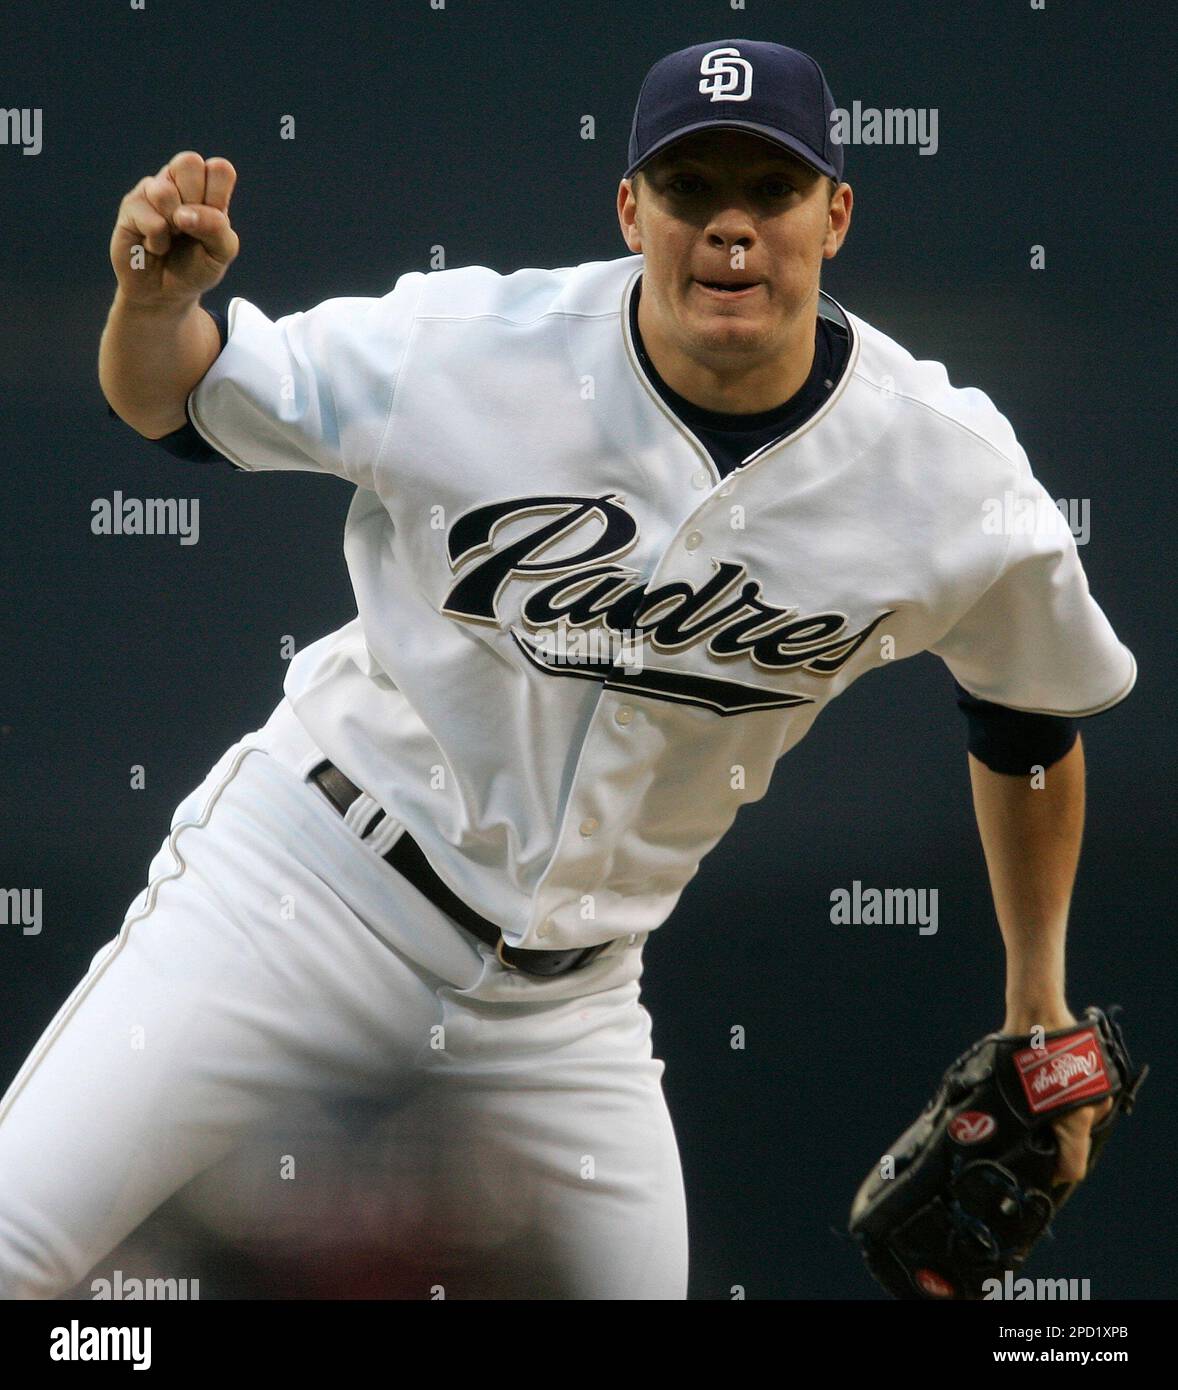 San Diego Padres' Jake Peavy readies a throw in the first inning against  the Seattle Mariners at a charity spring training baseball game, Thursday,  March 1, 2007, in Peoria, Ariz. (AP Photo/Elaine